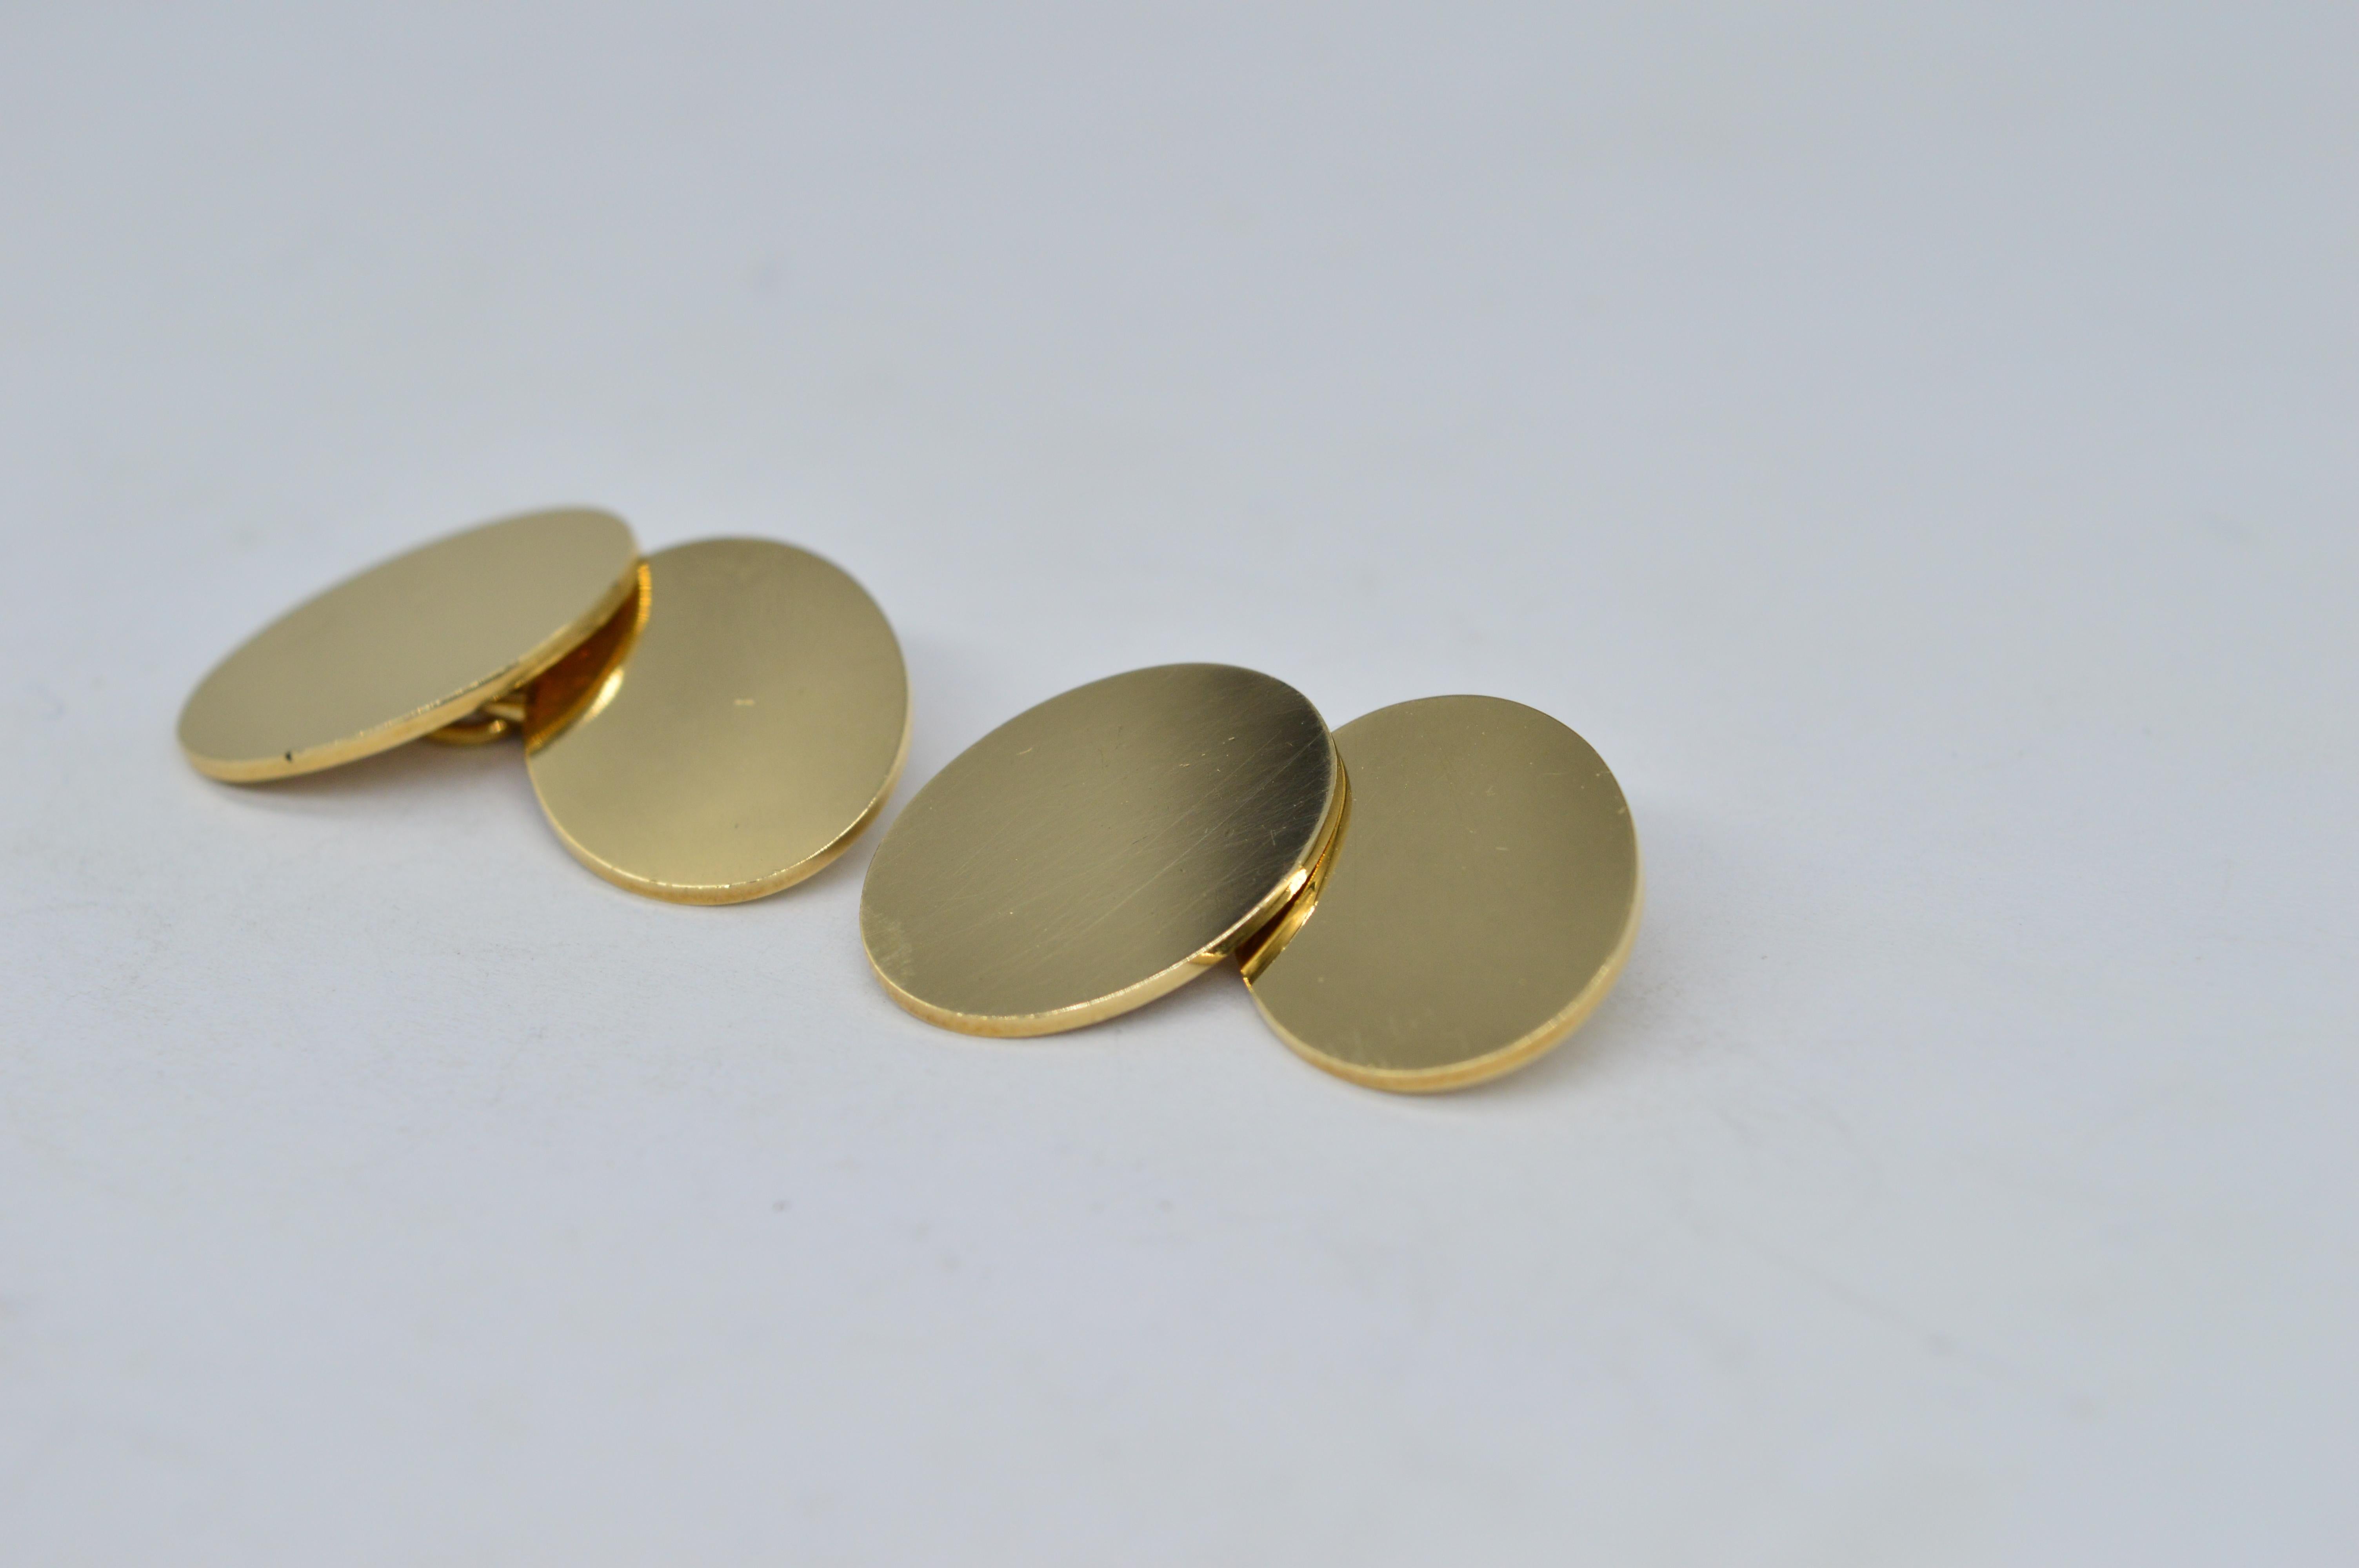 Vintage 9k Gold Aspinal of London Engravable Art Deco Luxury Statement Cufflinks In Excellent Condition For Sale In Benfleet, GB